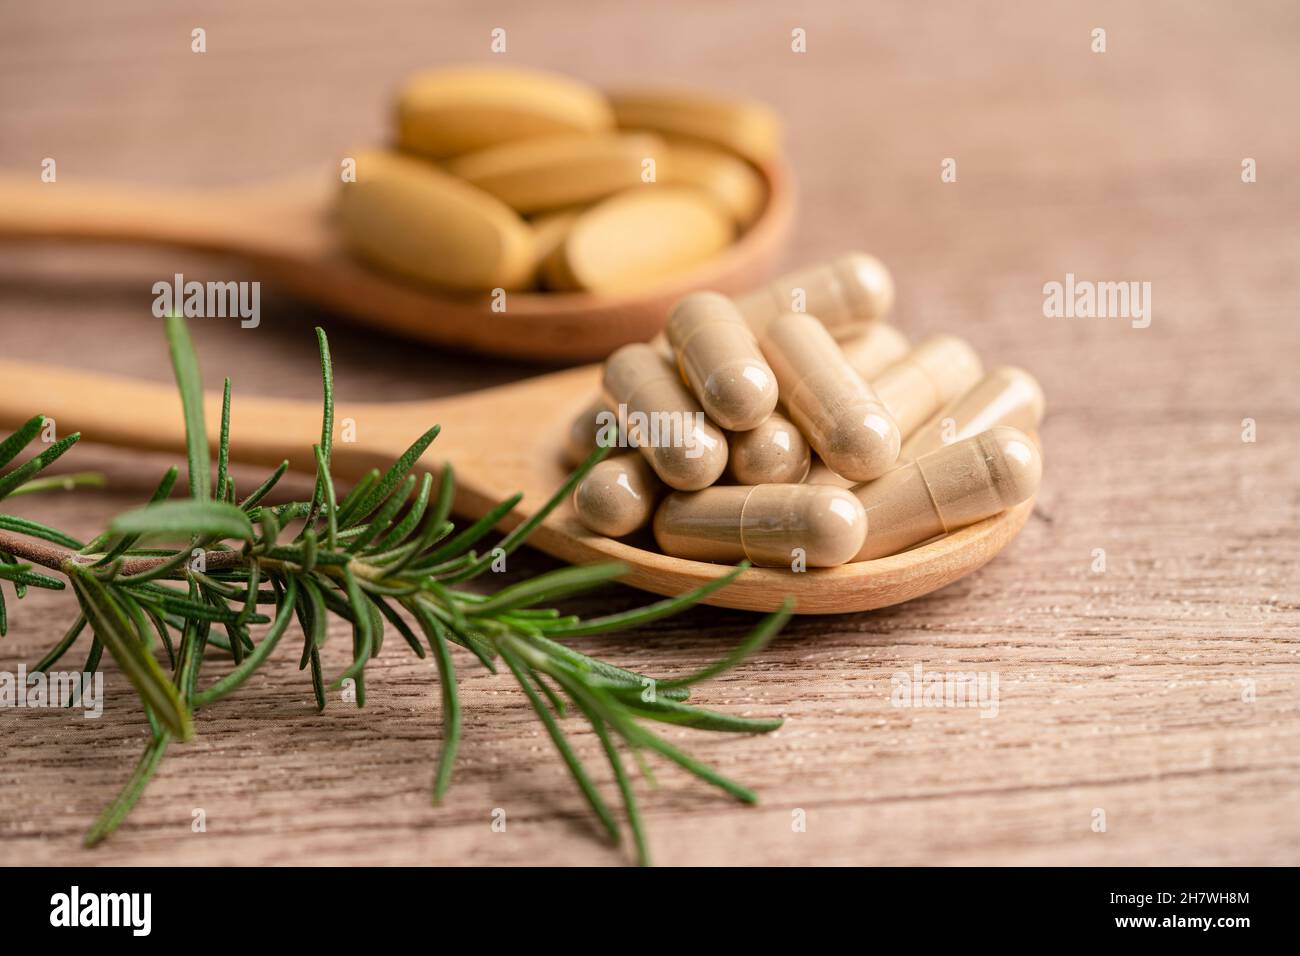 Alternative medicine herbal organic capsule with vitamin E omega 3 fish oil, mineral, drug with herbs leaf natural supplements for healthy good life. Stock Photo